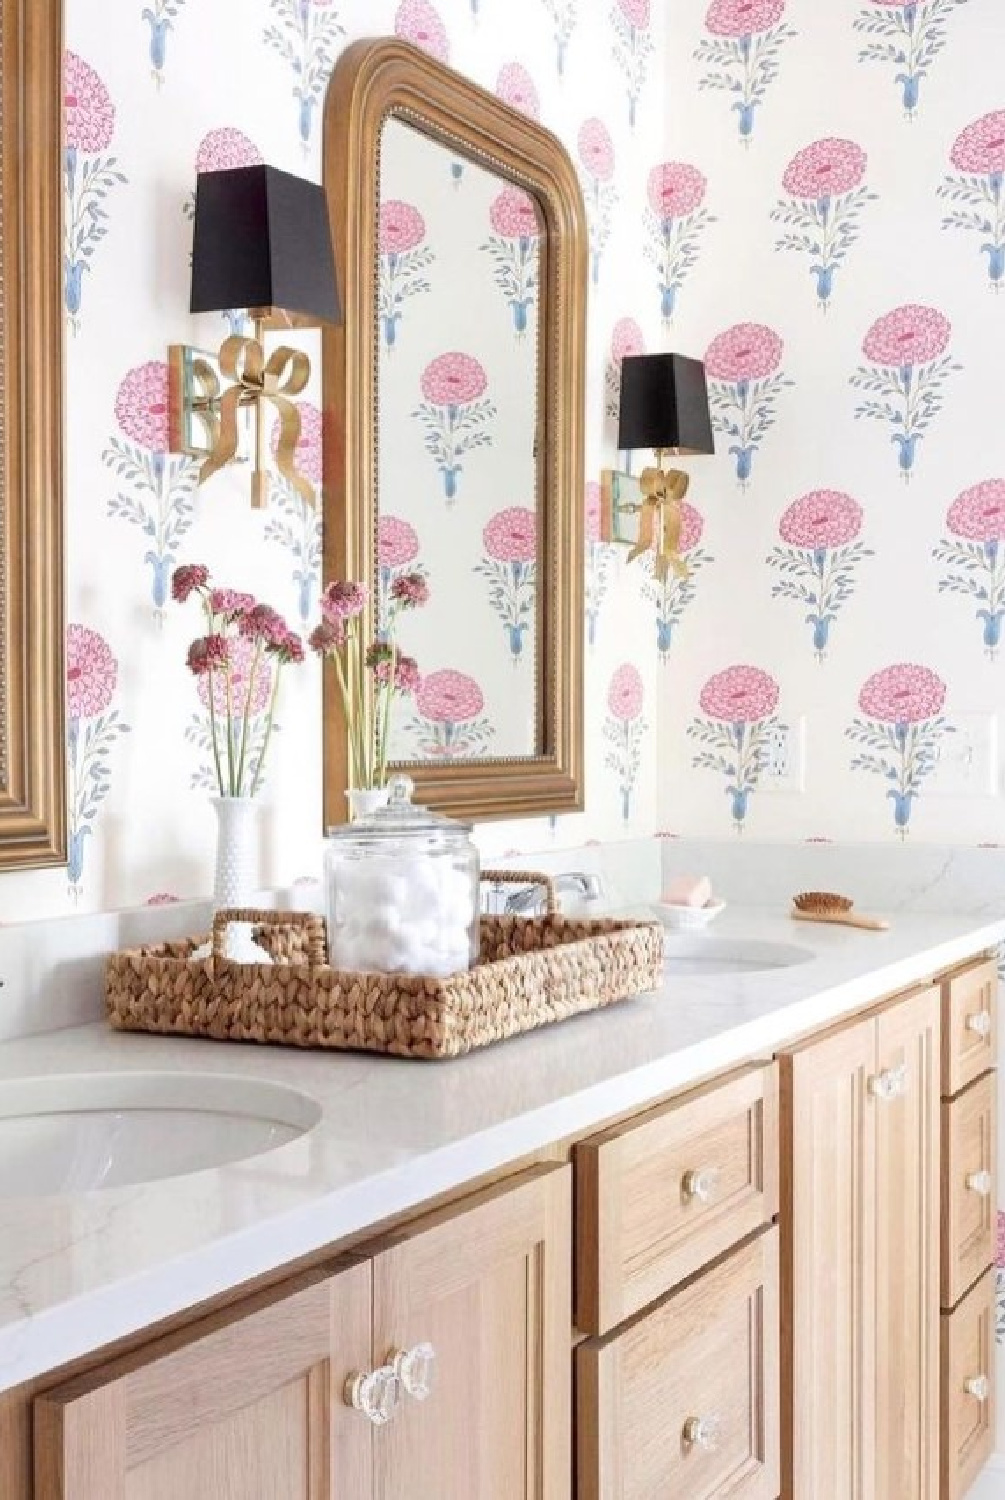 @scovell_remodeling - Beautiful wallpaper with pink floral pattern. #bathroomdesign #bathroomwallpaper